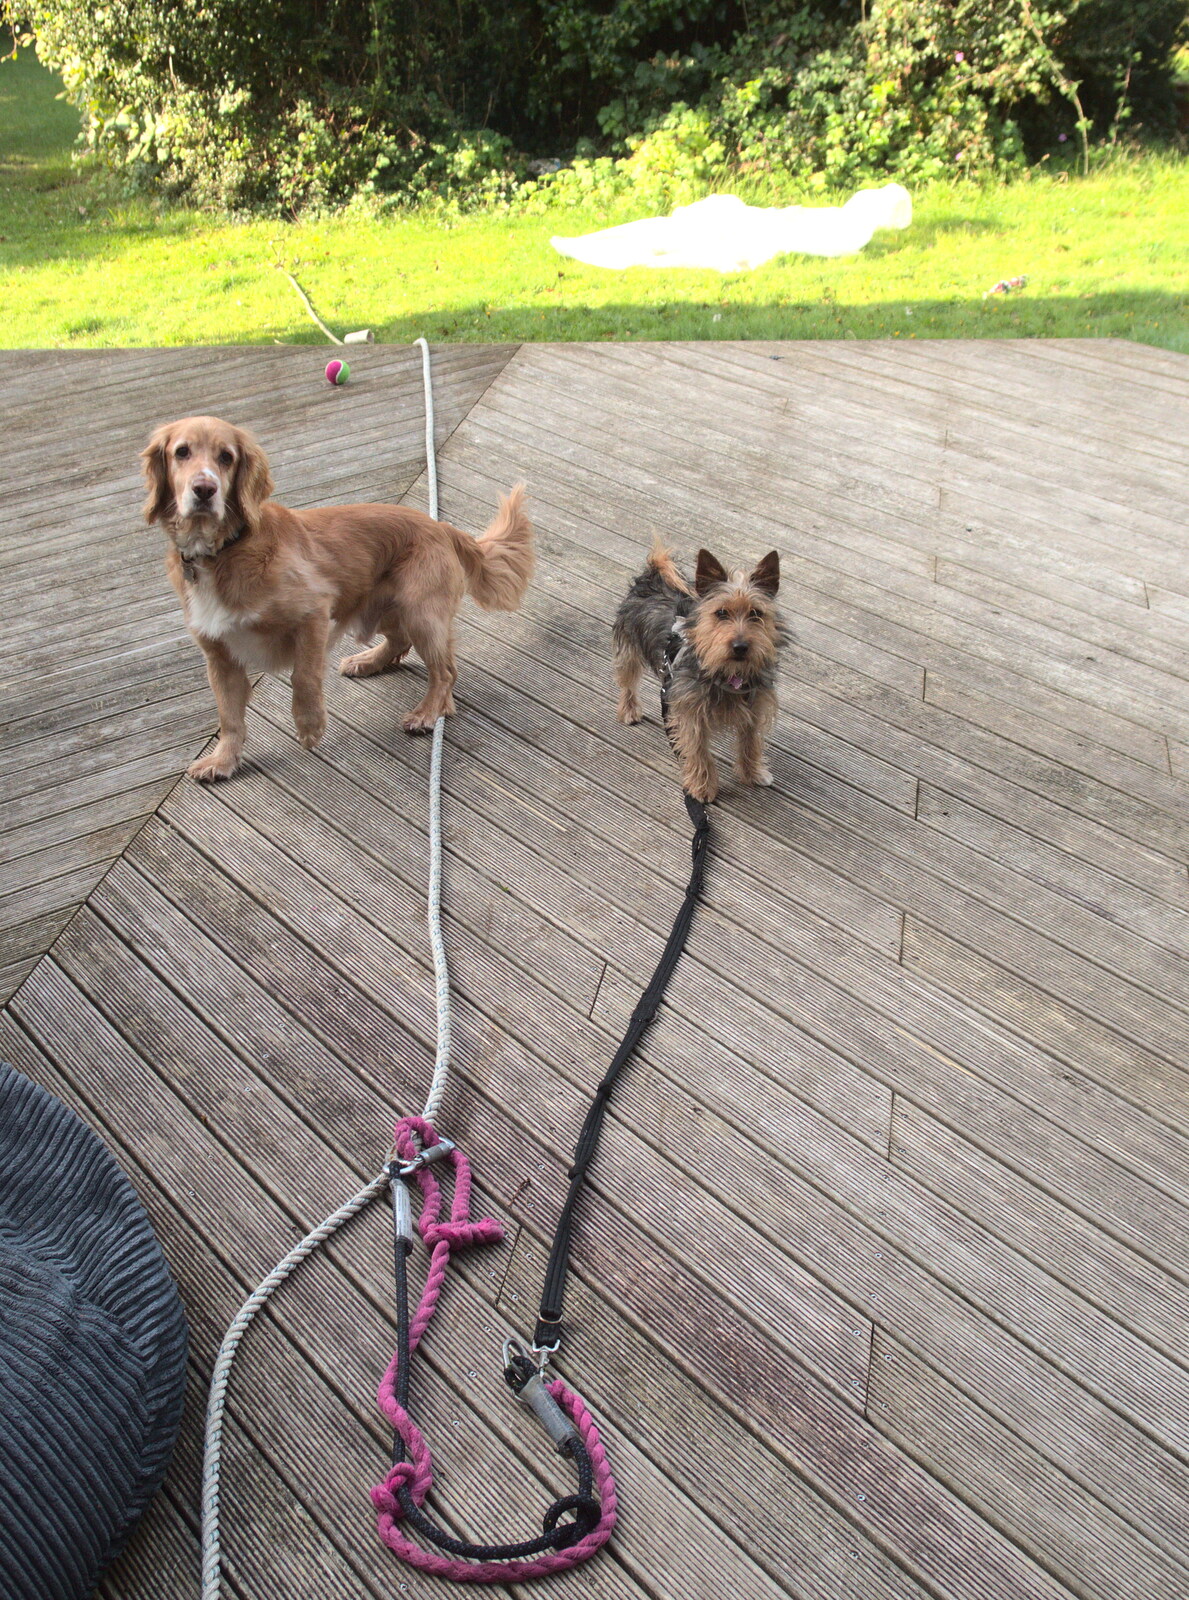 Barney and Binkie on the decking from Grandmother's Wake, Winkton, Christchurch, Dorset - 18th September 2017